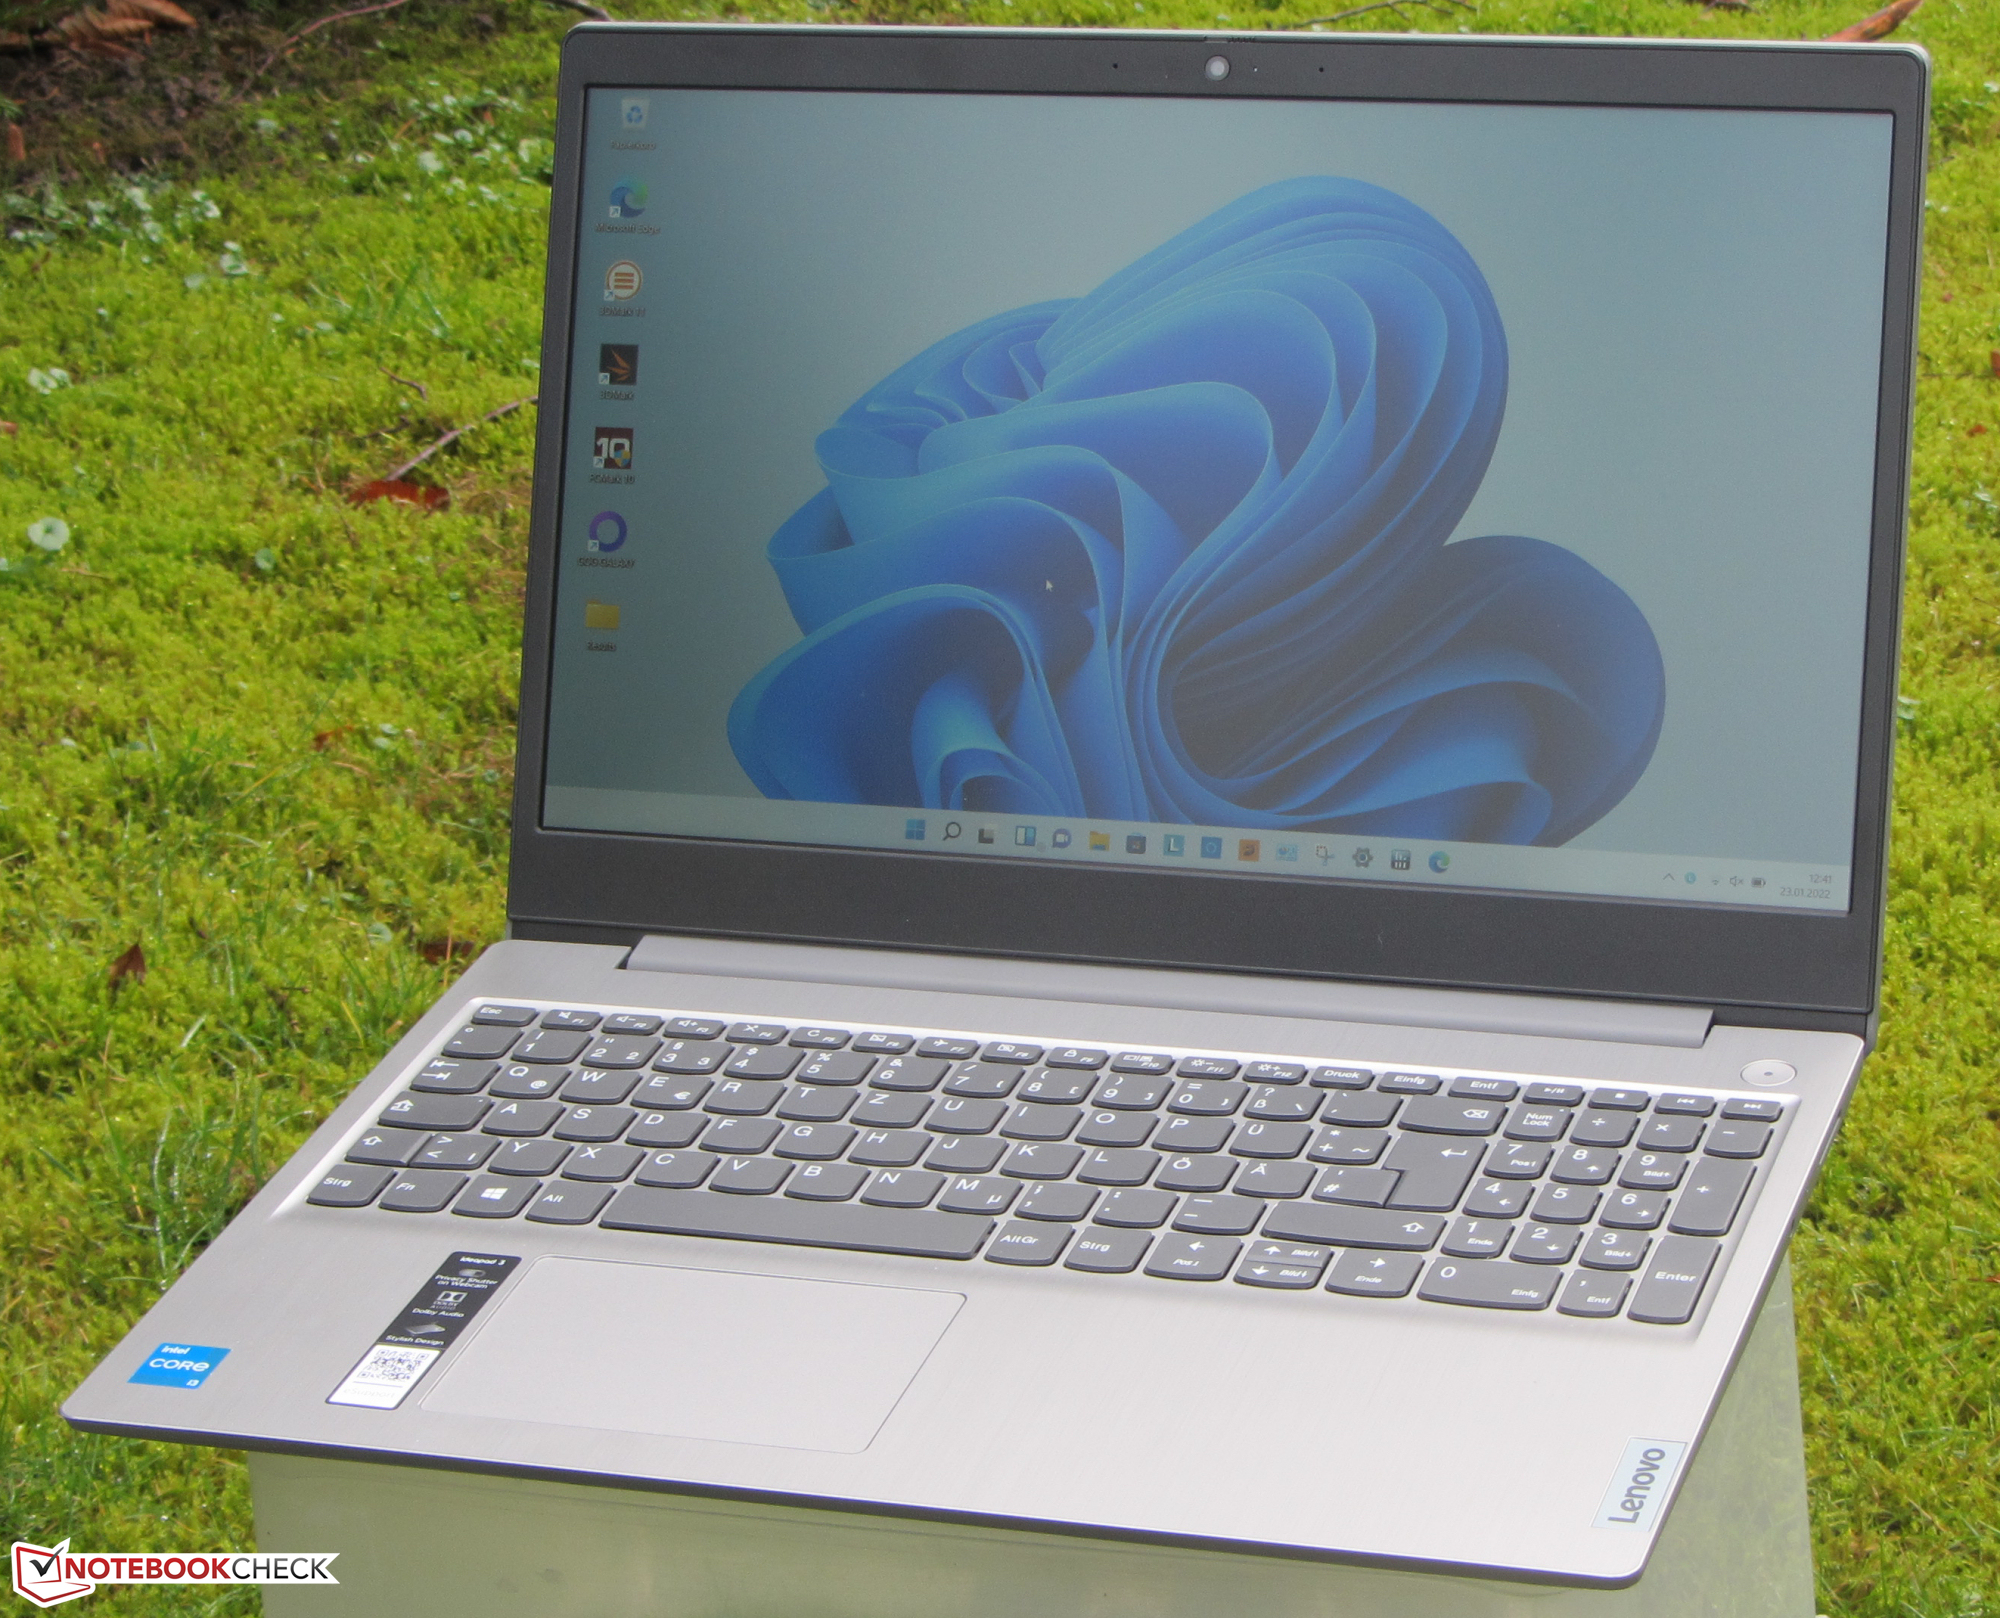 Lenovo IdeaPad 3 15 review: $400 is enticing, but you can get better  features elsewhere